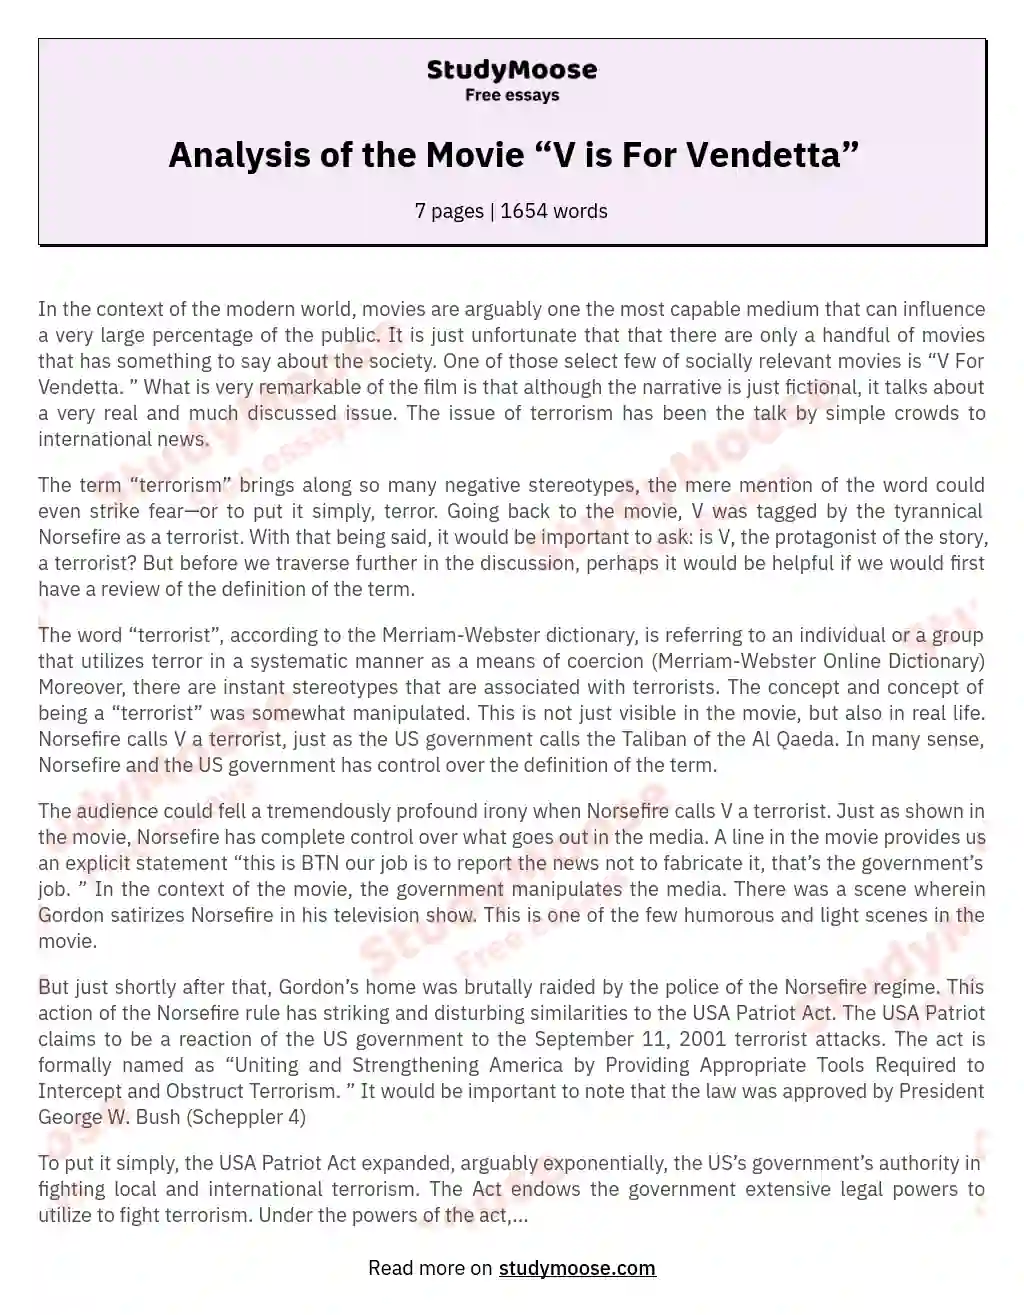 Analysis of the Movie “V is For Vendetta” essay